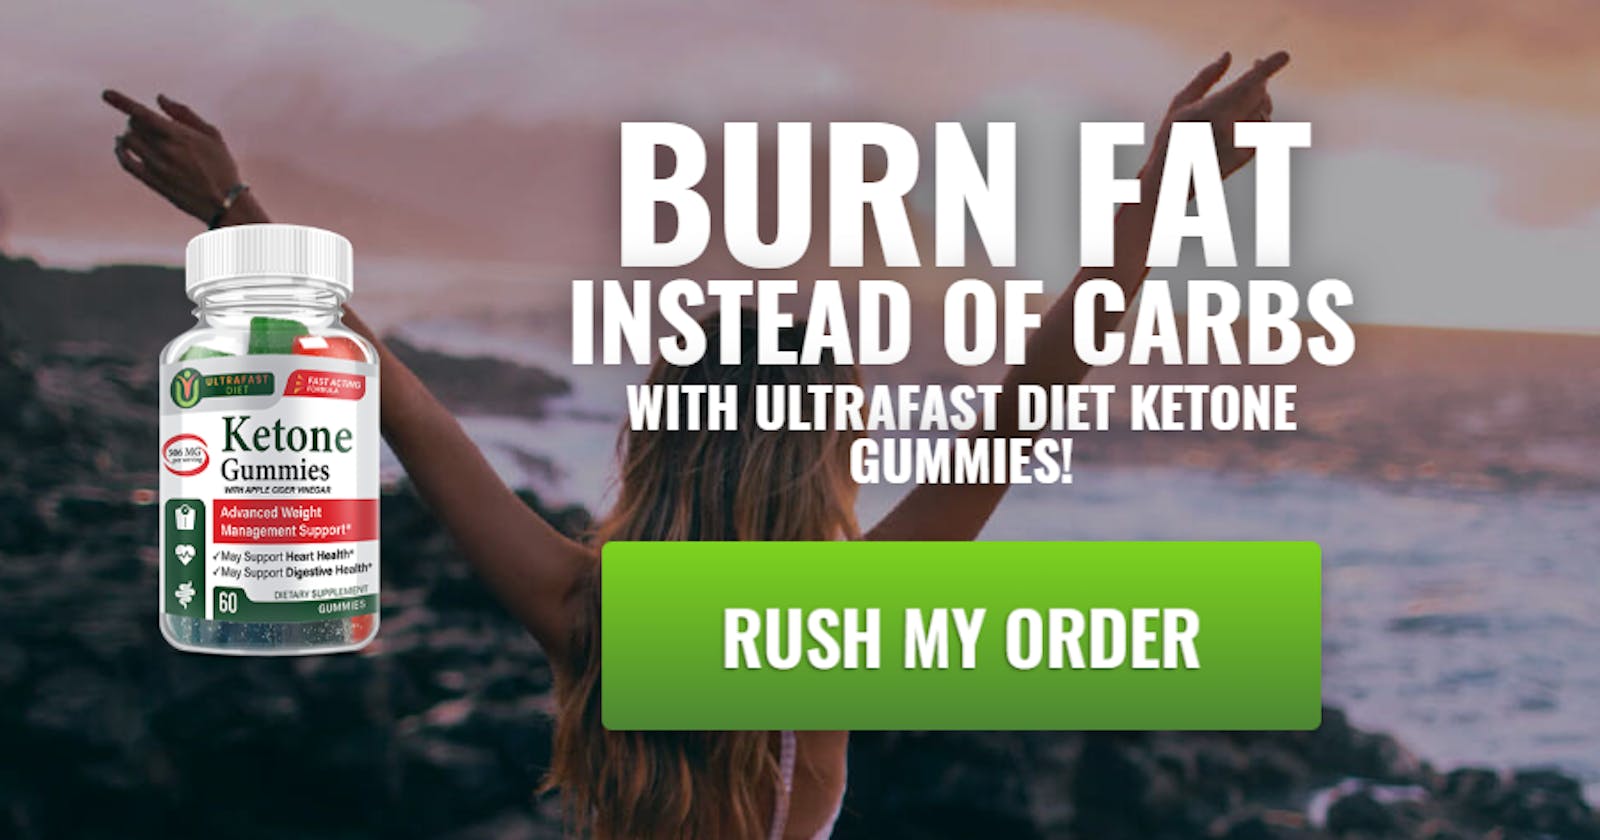 UltraFast Keto Gummies: A New Way to Support Your Ketogenic Diet!